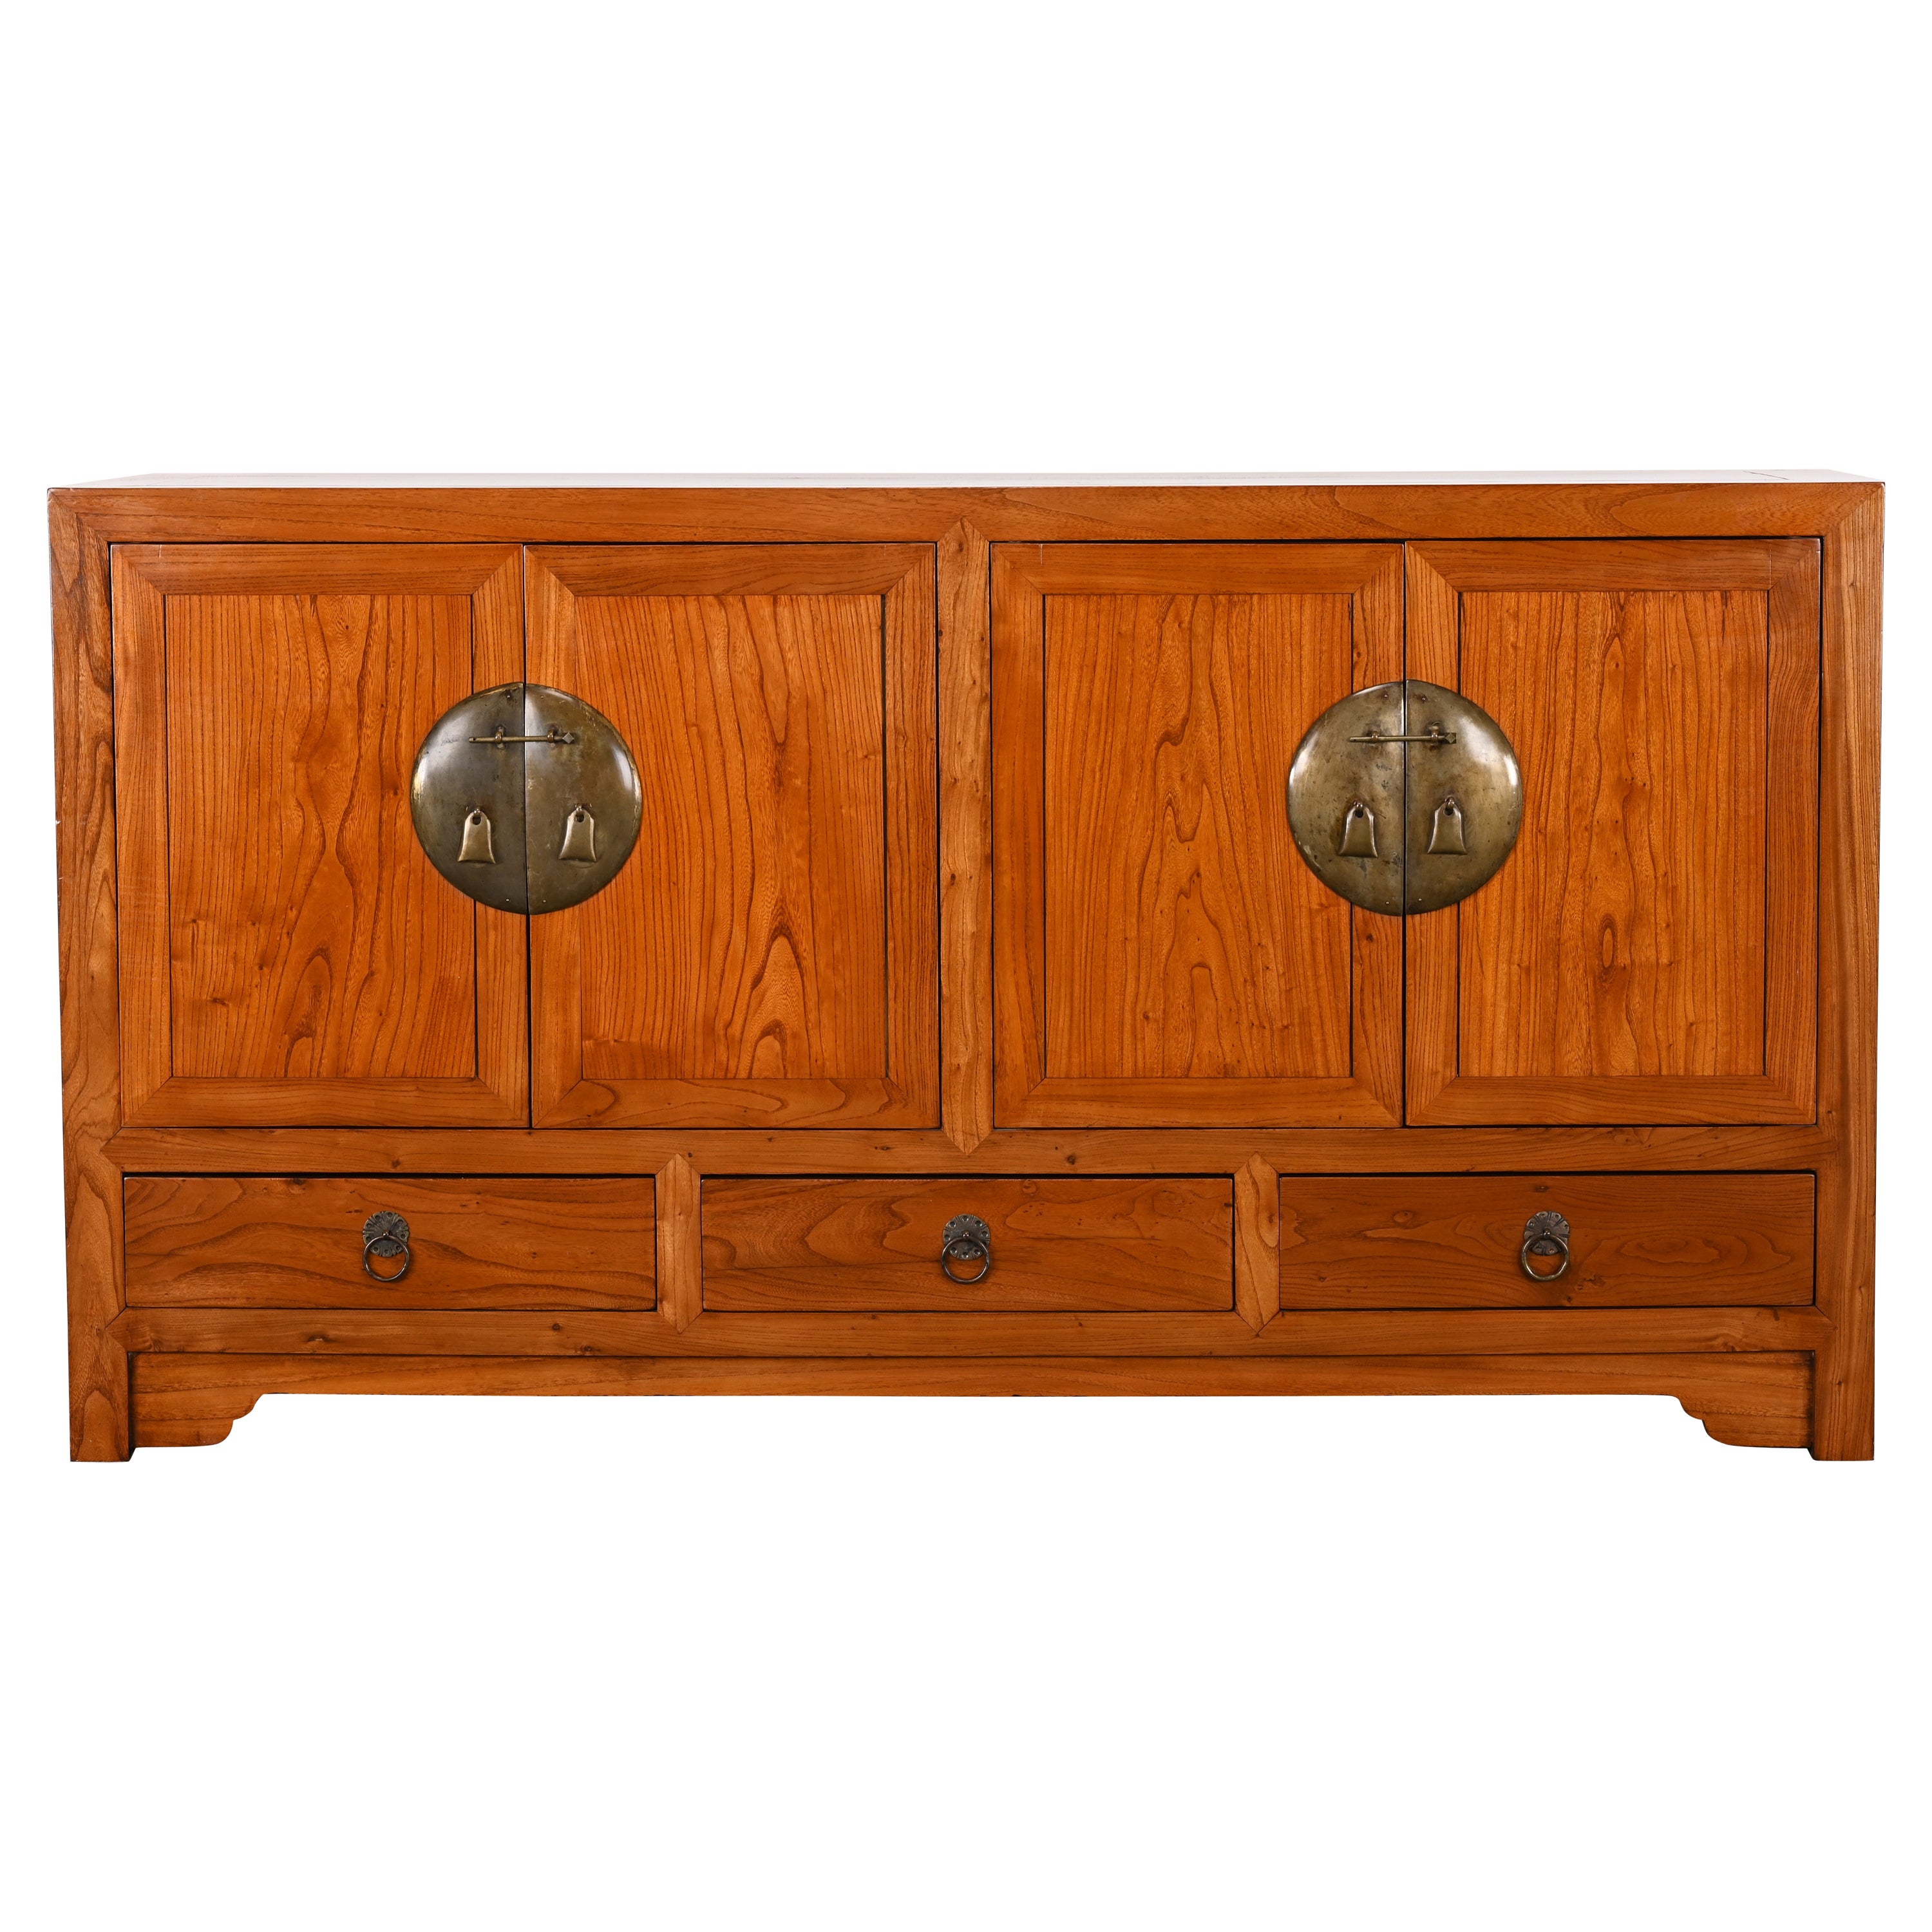 Chinese Elmwood and Brass Credenza or Sideboard, Mid 20th Century For Sale